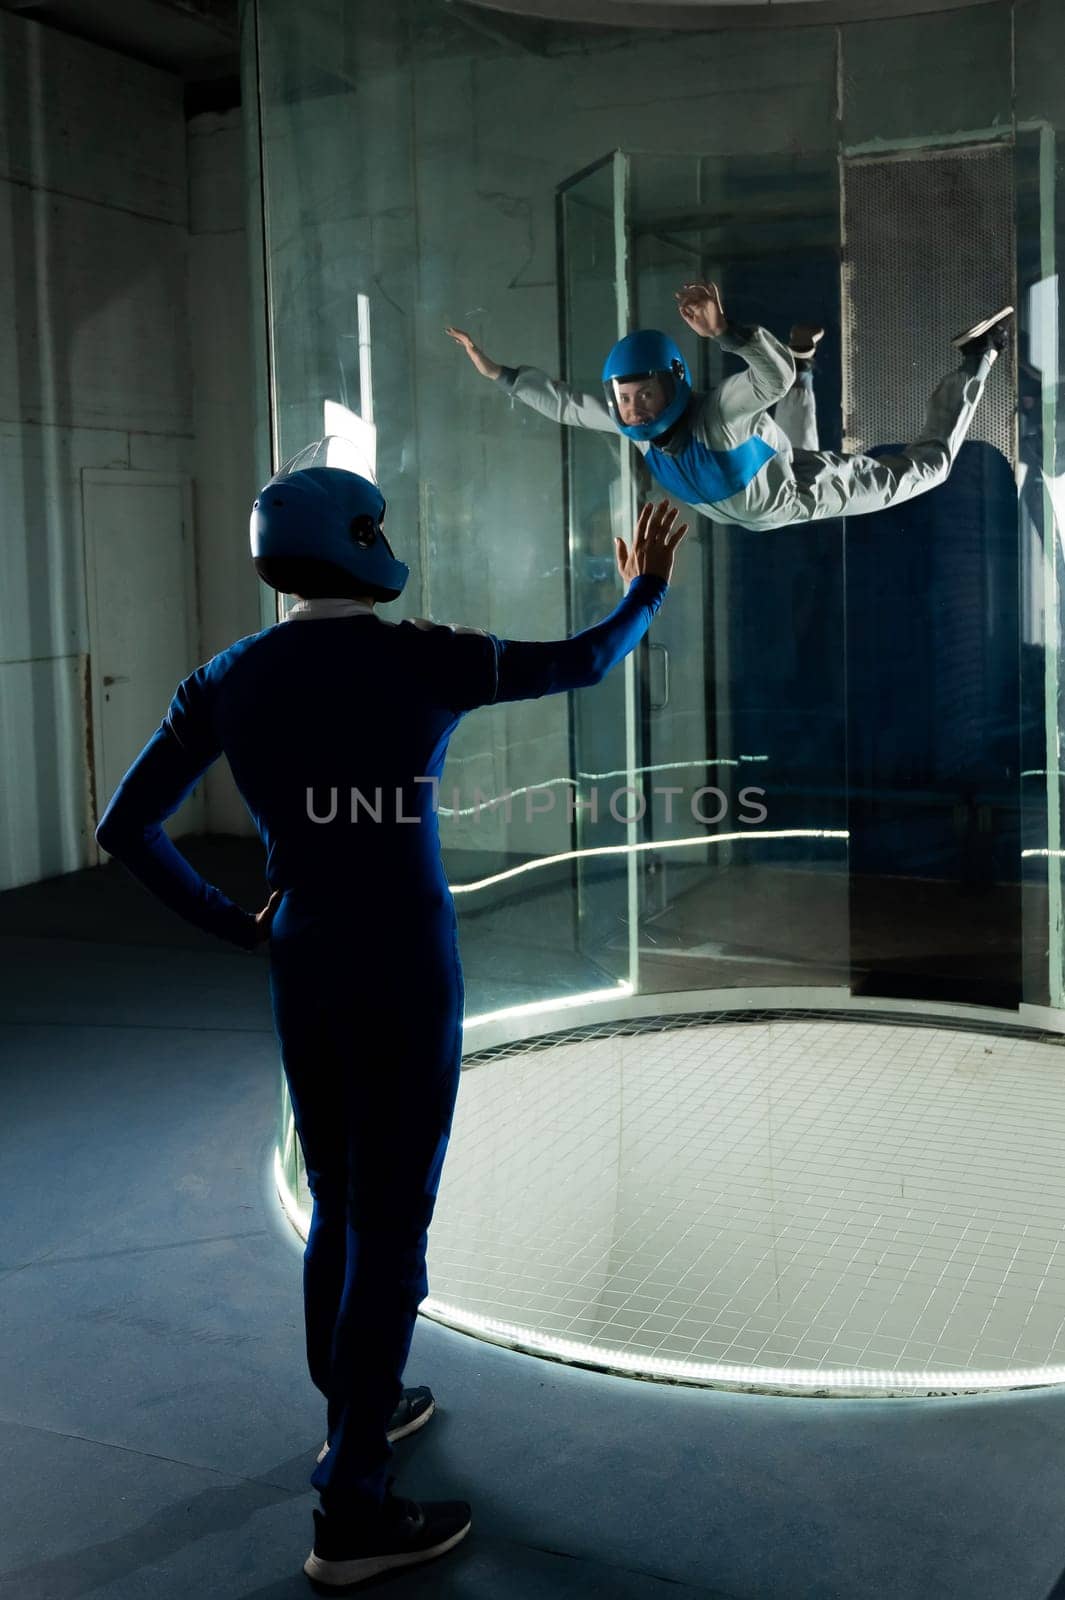 A male instructor teaches a woman how to fly in a wind tunnel. Free fall simulator. by mrwed54